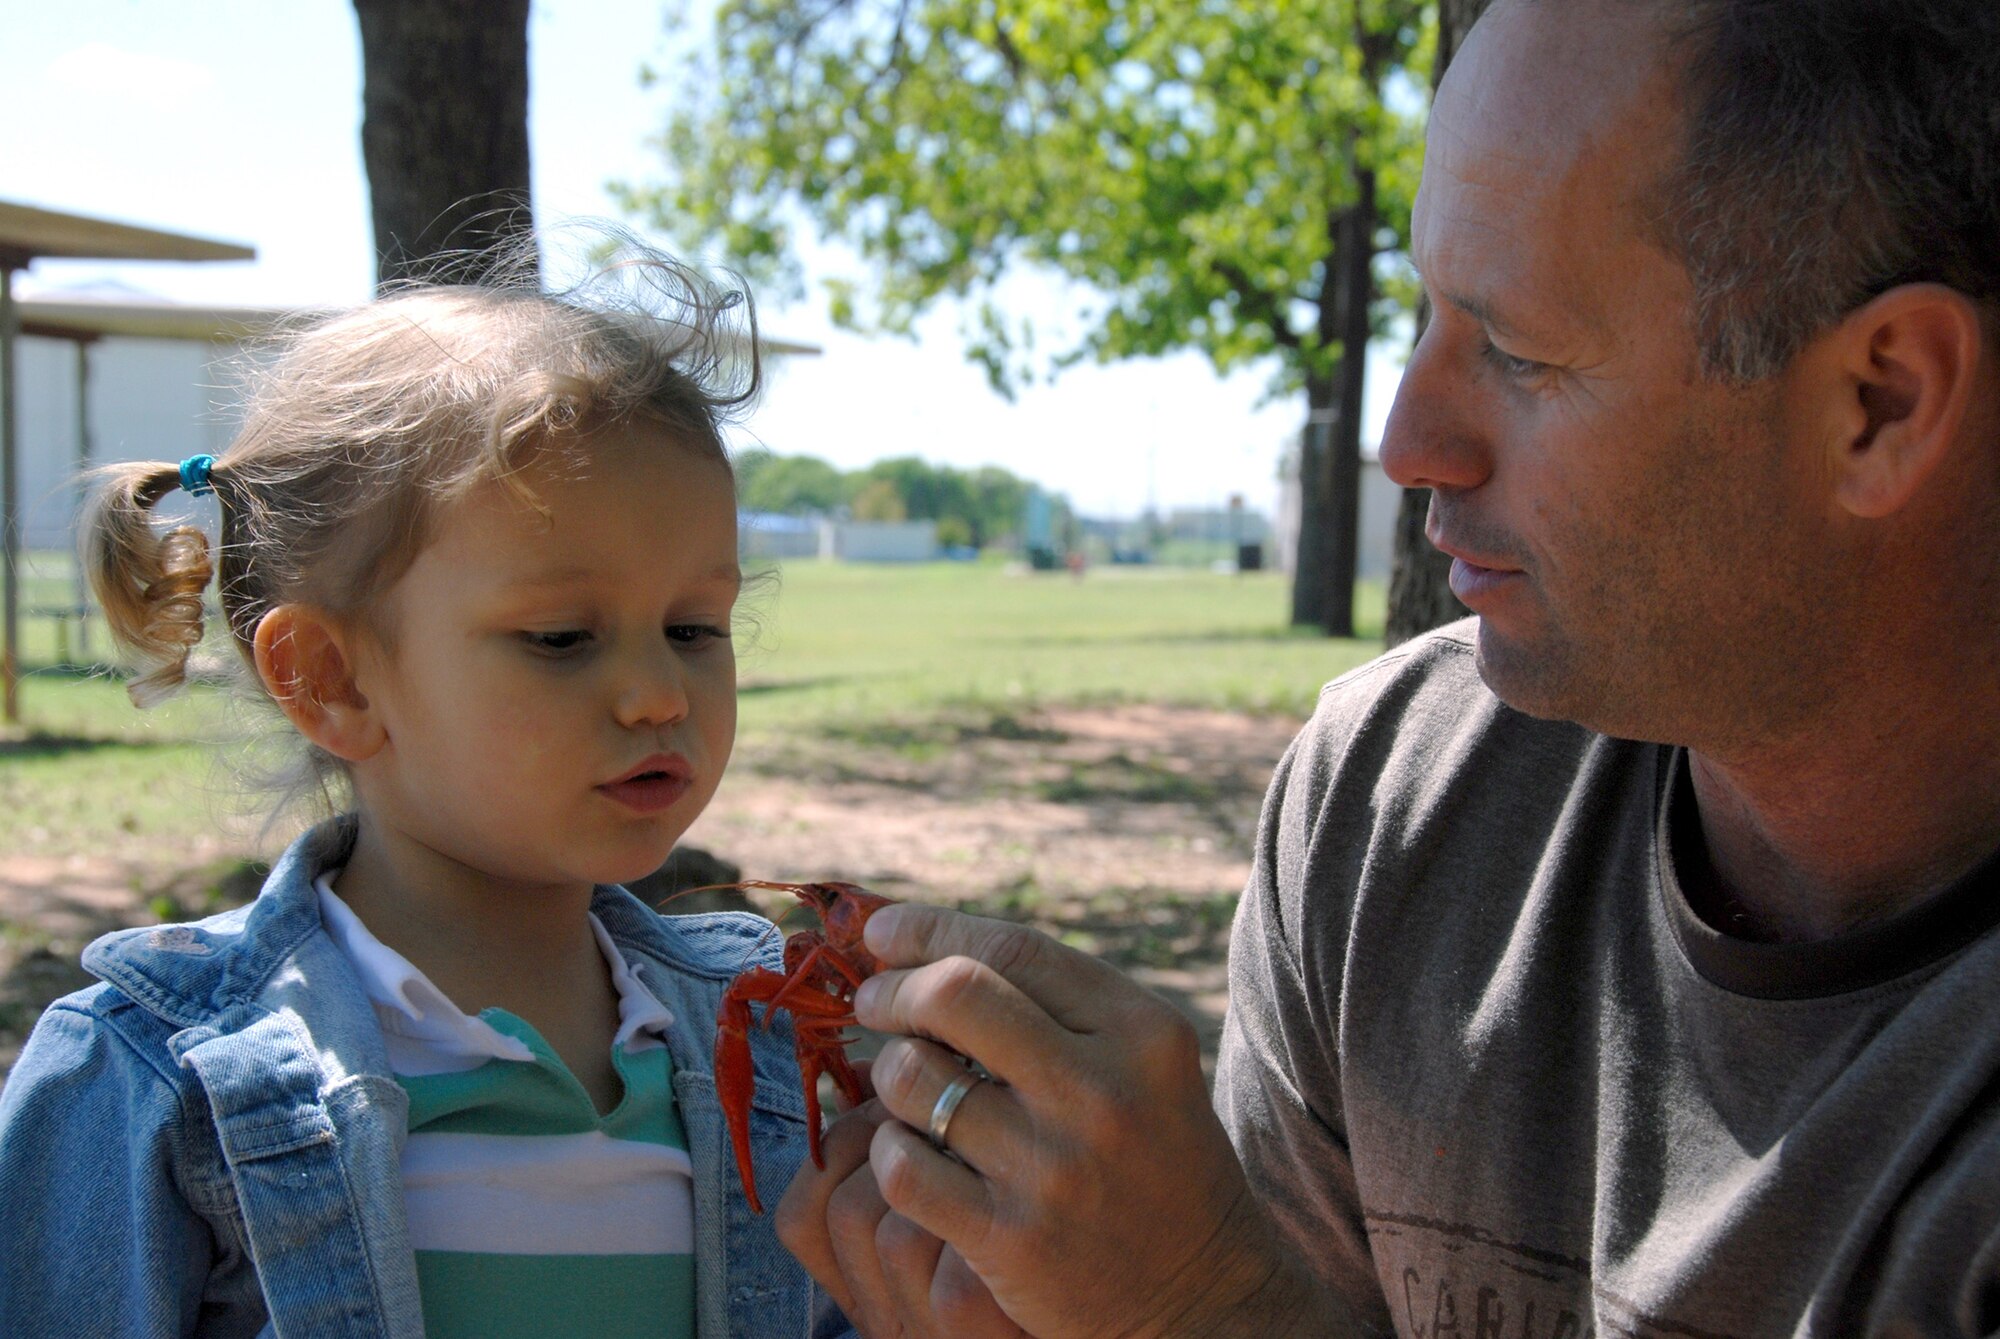 Springtime brings people together at the Naval Air Station Joint Reserve Base Fort Worth, Texas to enjoy a crawdad boil. Jessica, two and a half years old, explores the mystery of a crayfish with her father, Chief Master Sgt. Ricky Hester at a recent outing. The 301st Maintenance Squadron members and their families gathered together recently to enjoy the summertime weather and good friends at the base marina while experiencing a southern seafood delicacy. (U.S. Air Force Photo)